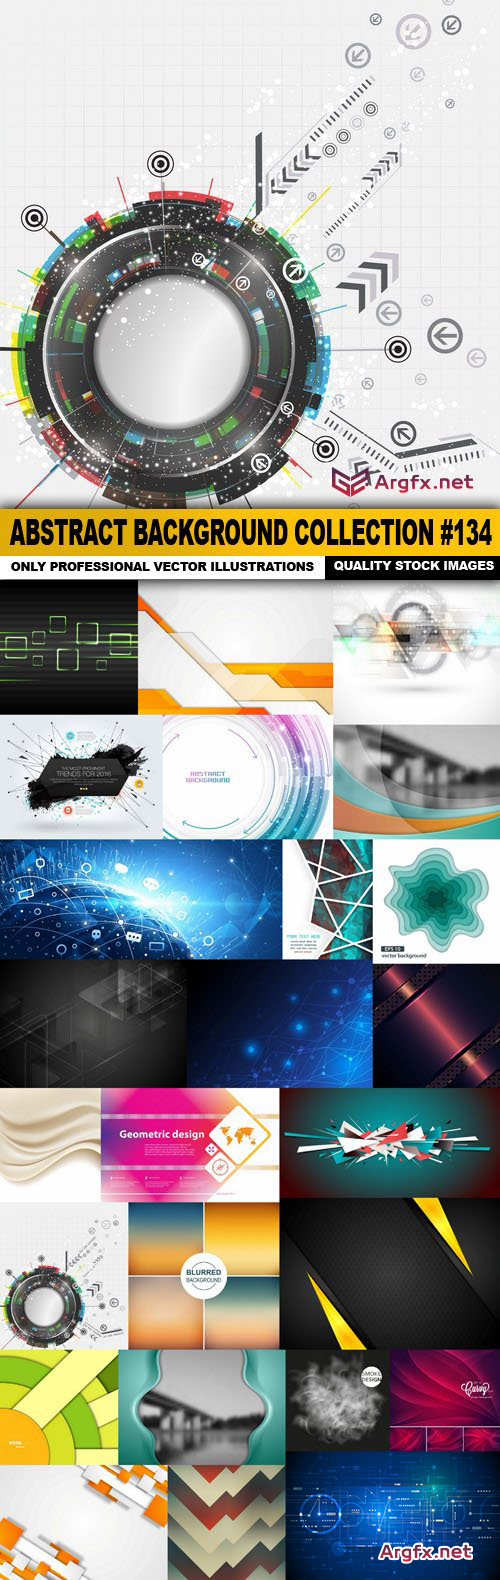  Abstract Background Collection #134 - 25 Vector